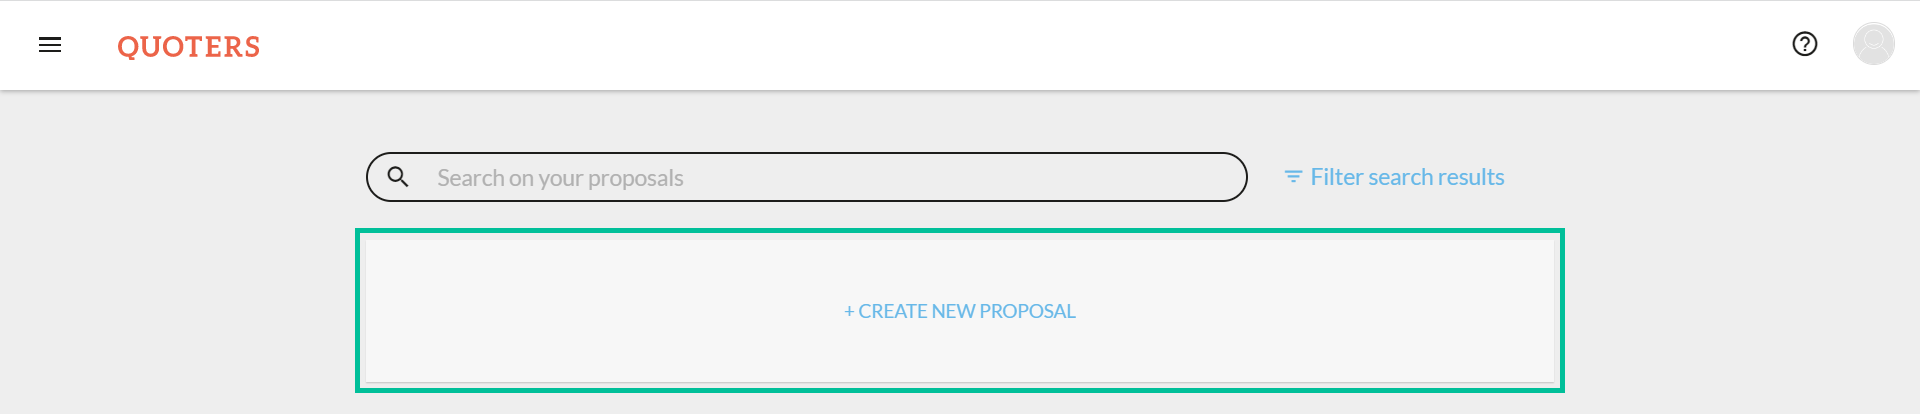 QT_-_Create_new_proposal_button.png